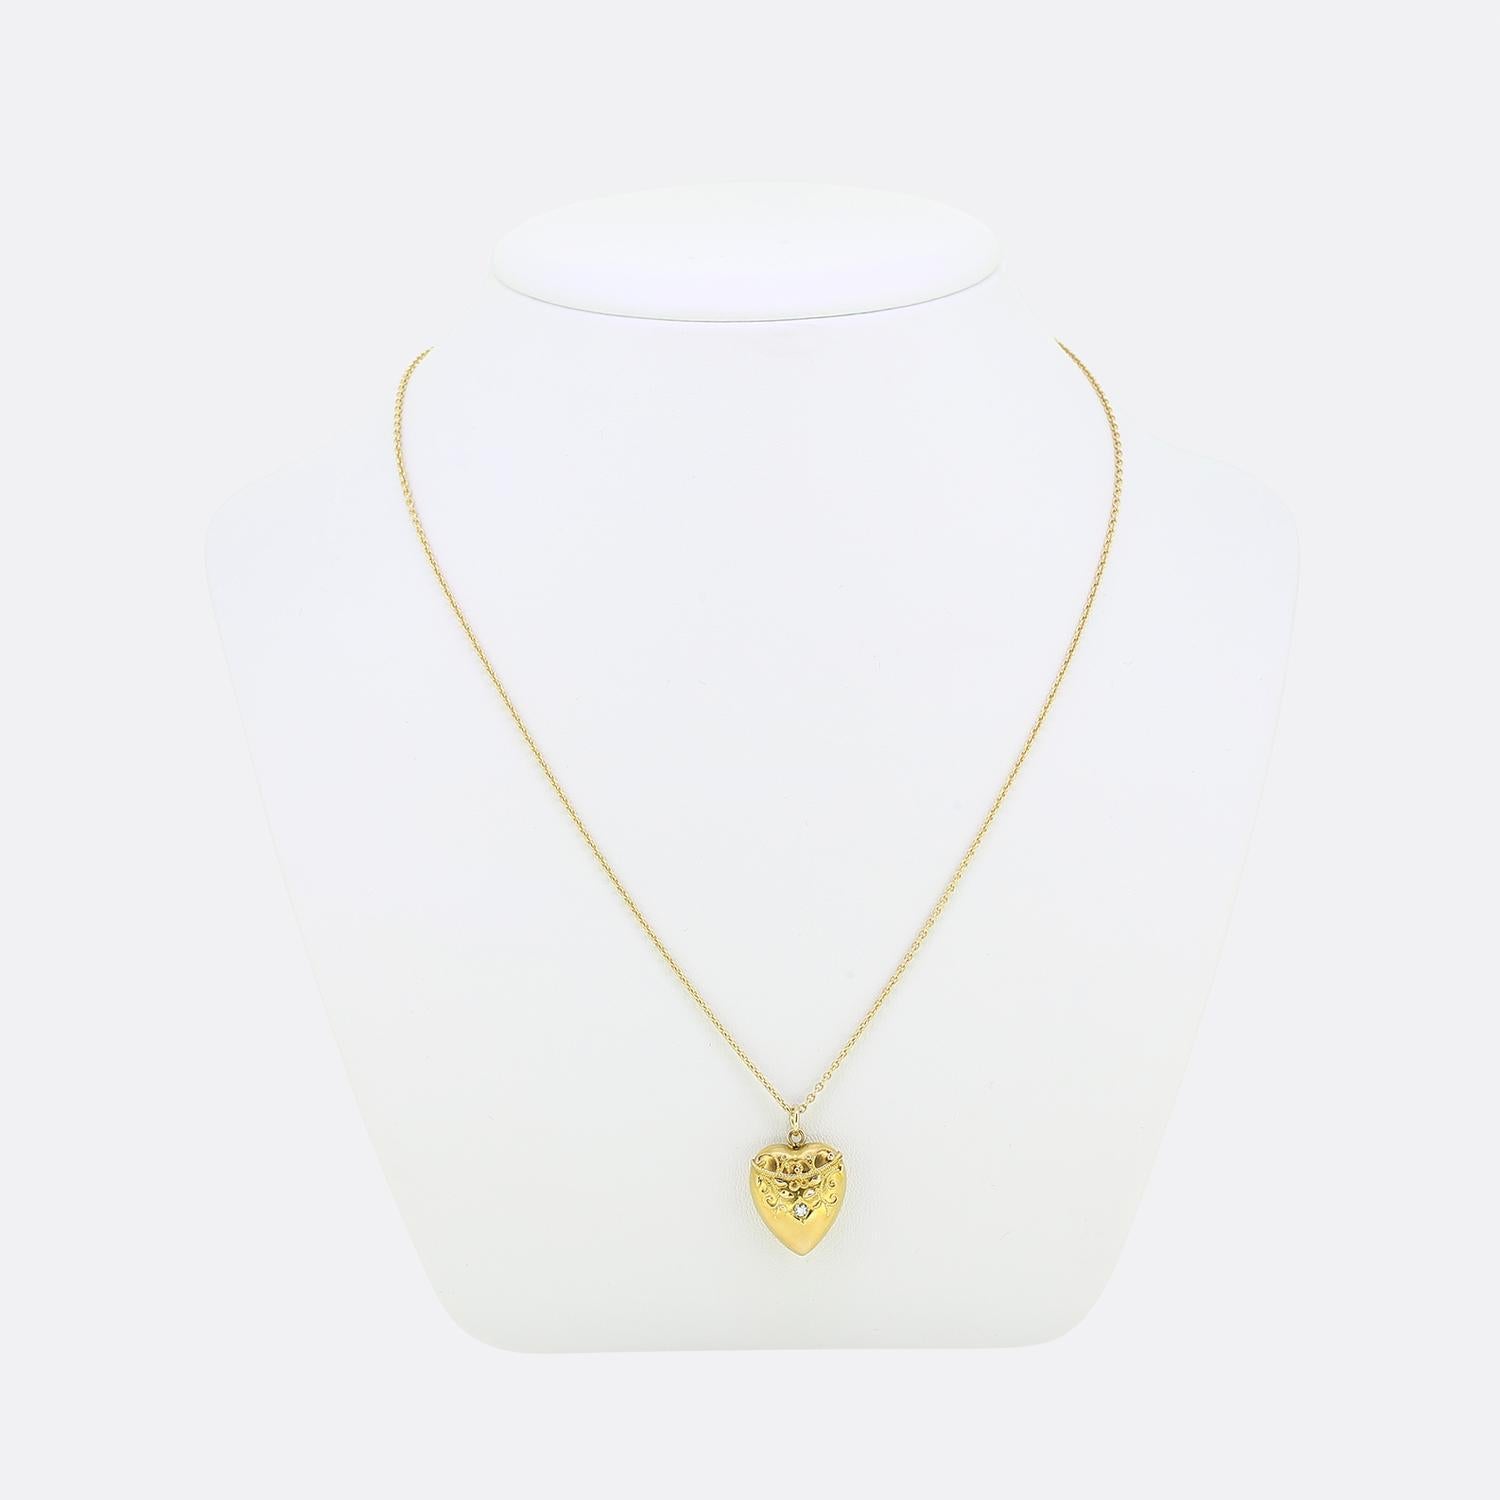 Here we have a beautiful diamond pendant necklace. This antique pendant has been crafted from 18ct yellow gold into the the shape of a little love heart and expertly set with a single round faceted old cut diamond. This focal stone is then